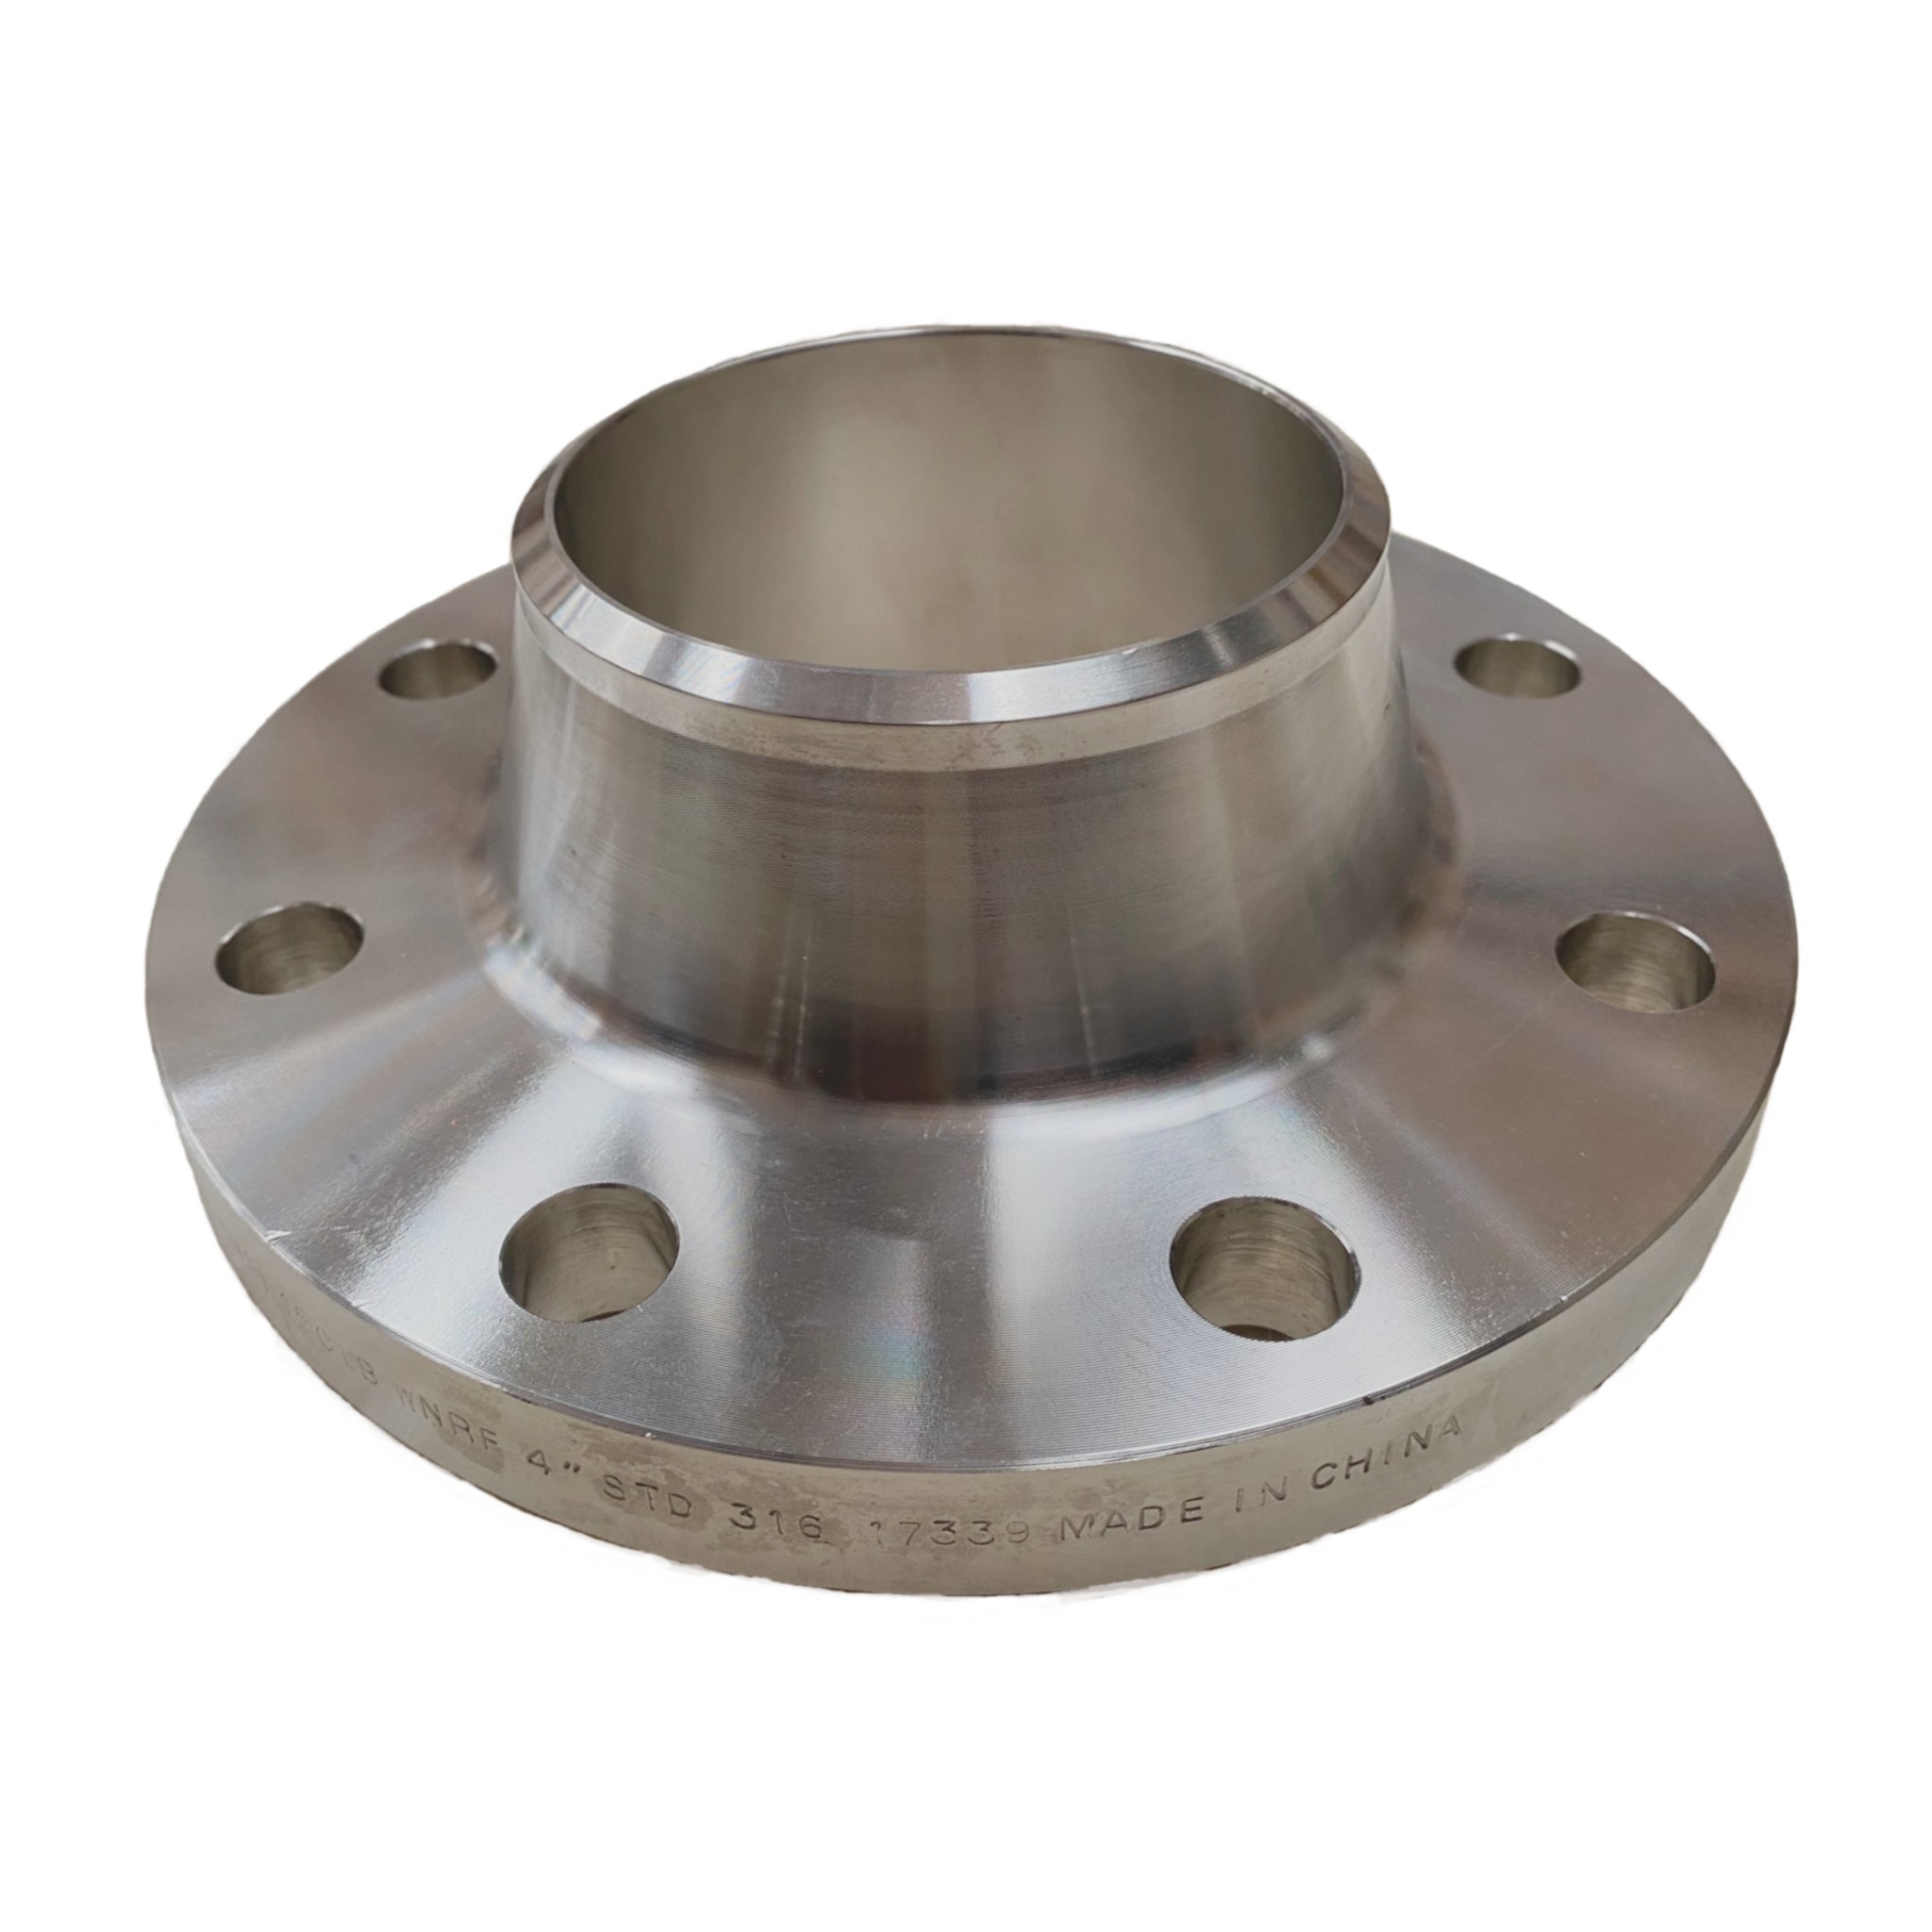 Ss316 Flange Ansi 150 Raised Face Weld Neck Unimech Asia Pacific